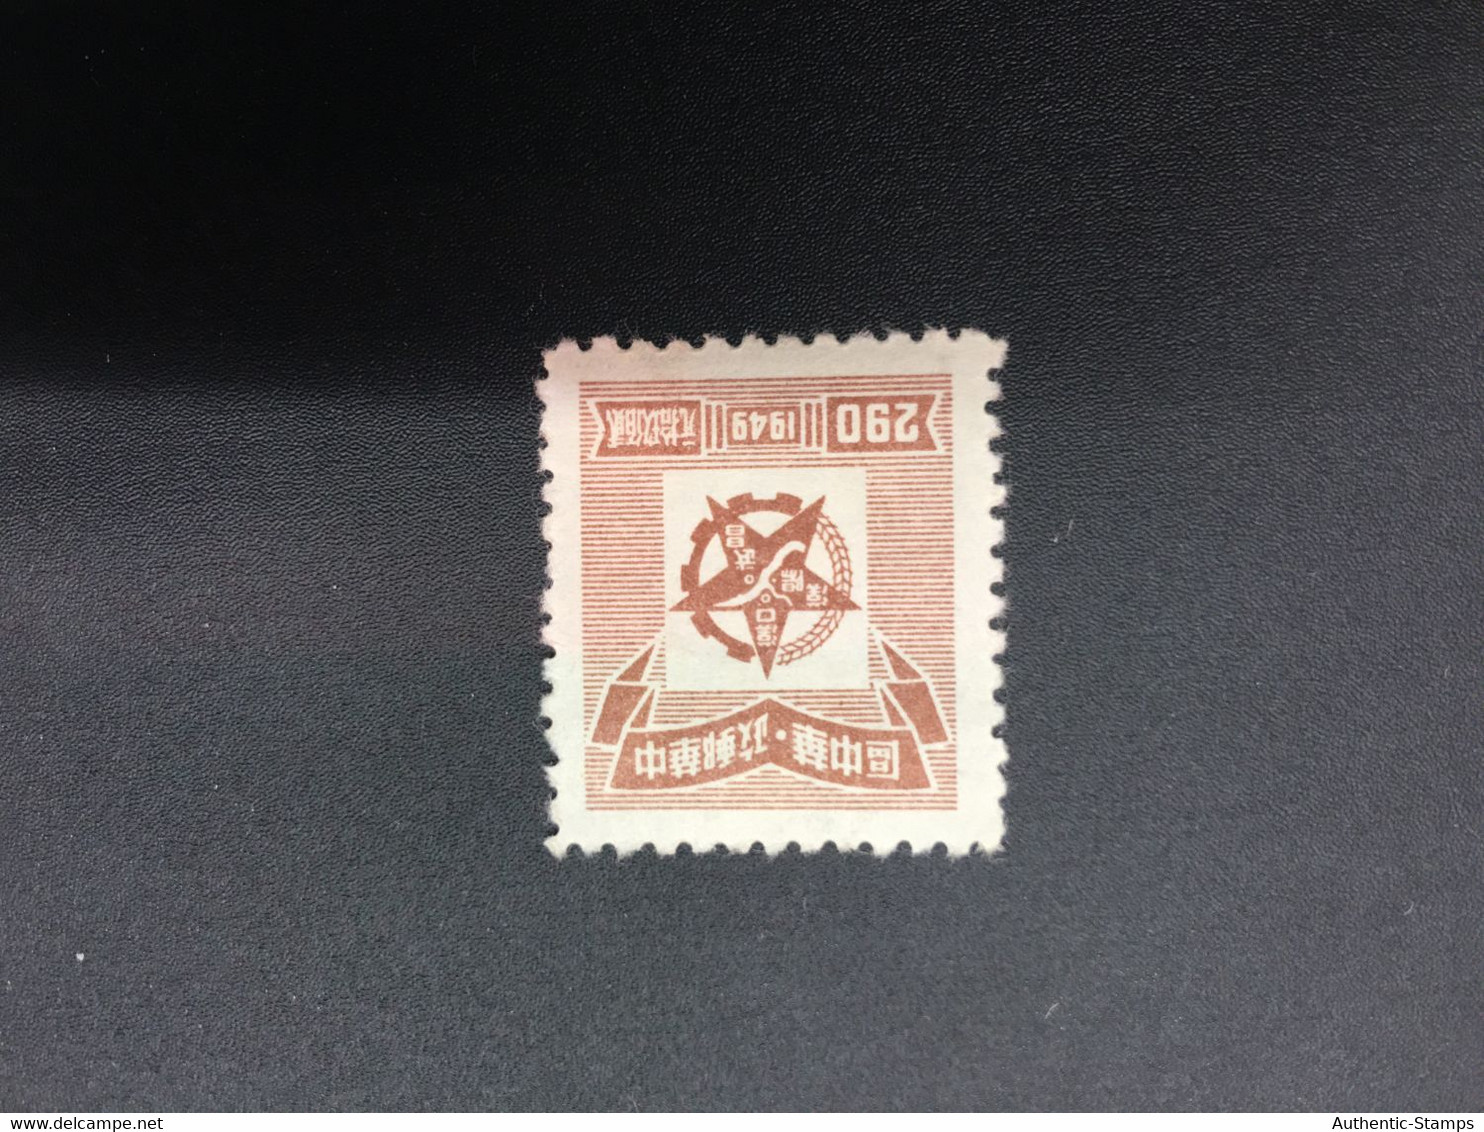 CHINA STAMP,  Unused, TIMBRO, STEMPEL,  CINA, CHINE, LIST 7818 - Central China 1948-49